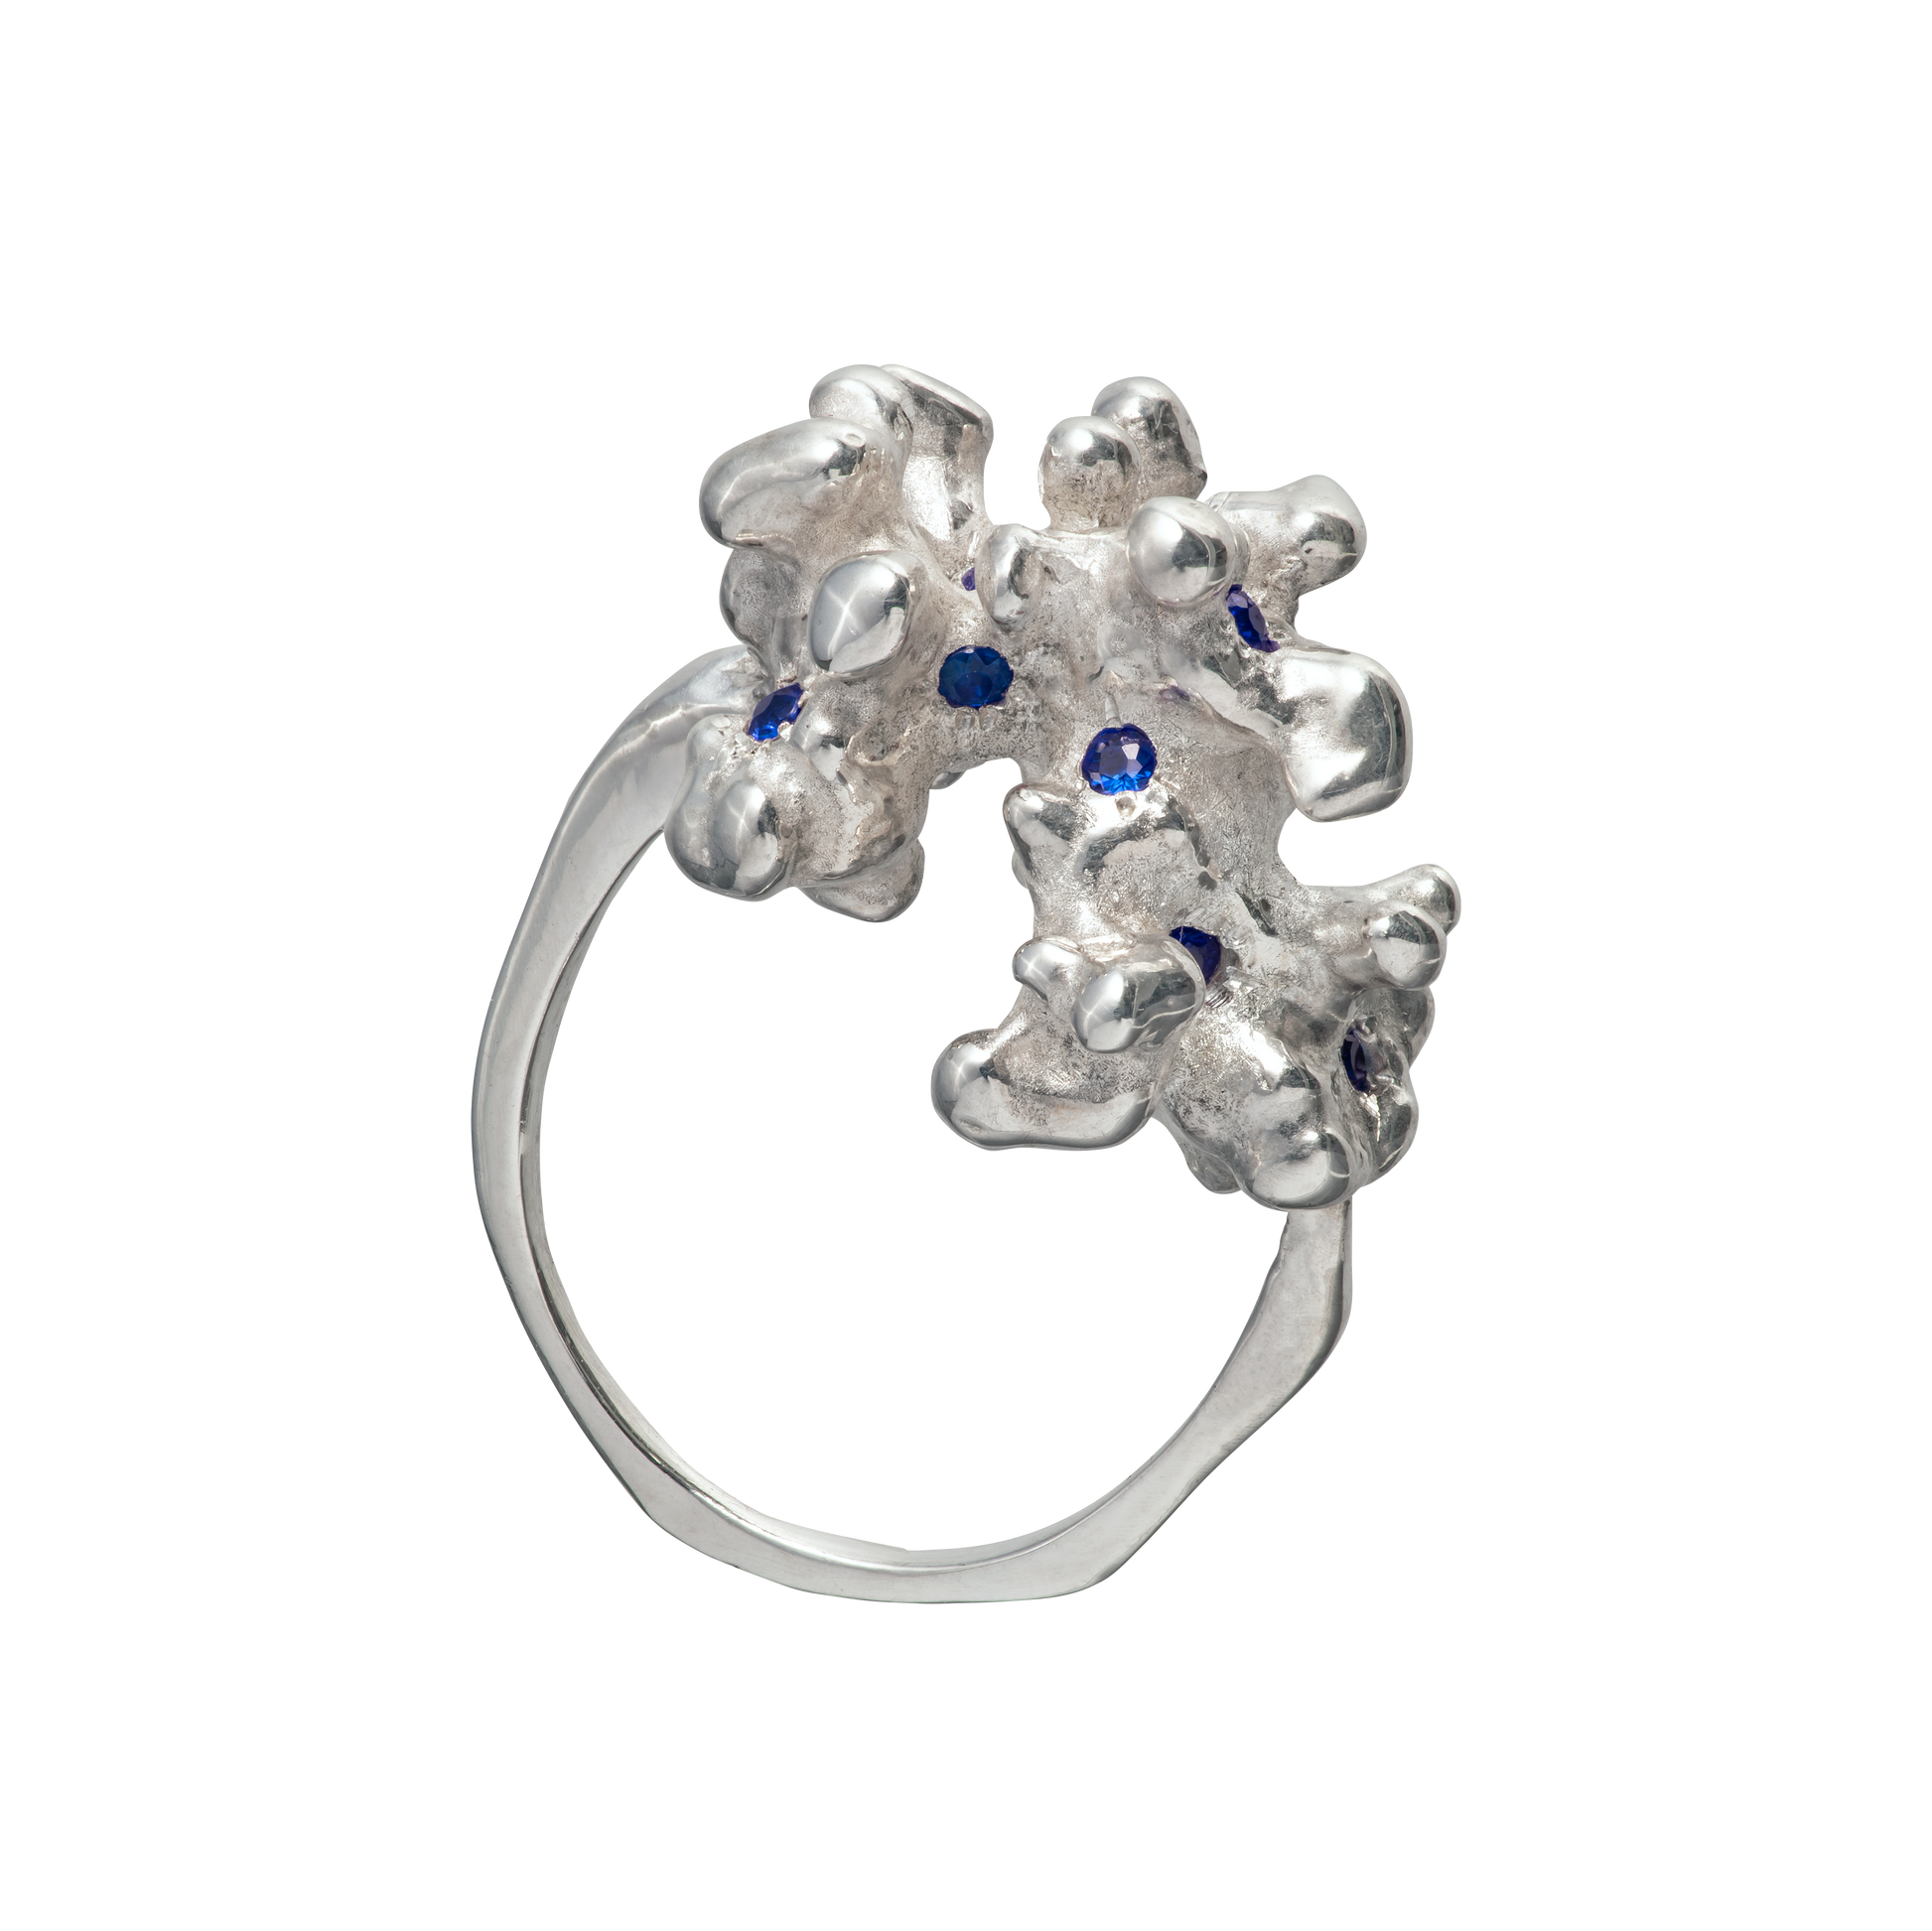 A sterling silver ring cast from a fragment of coral and set with 10 blue sapphires. Made by Violette Stehli.